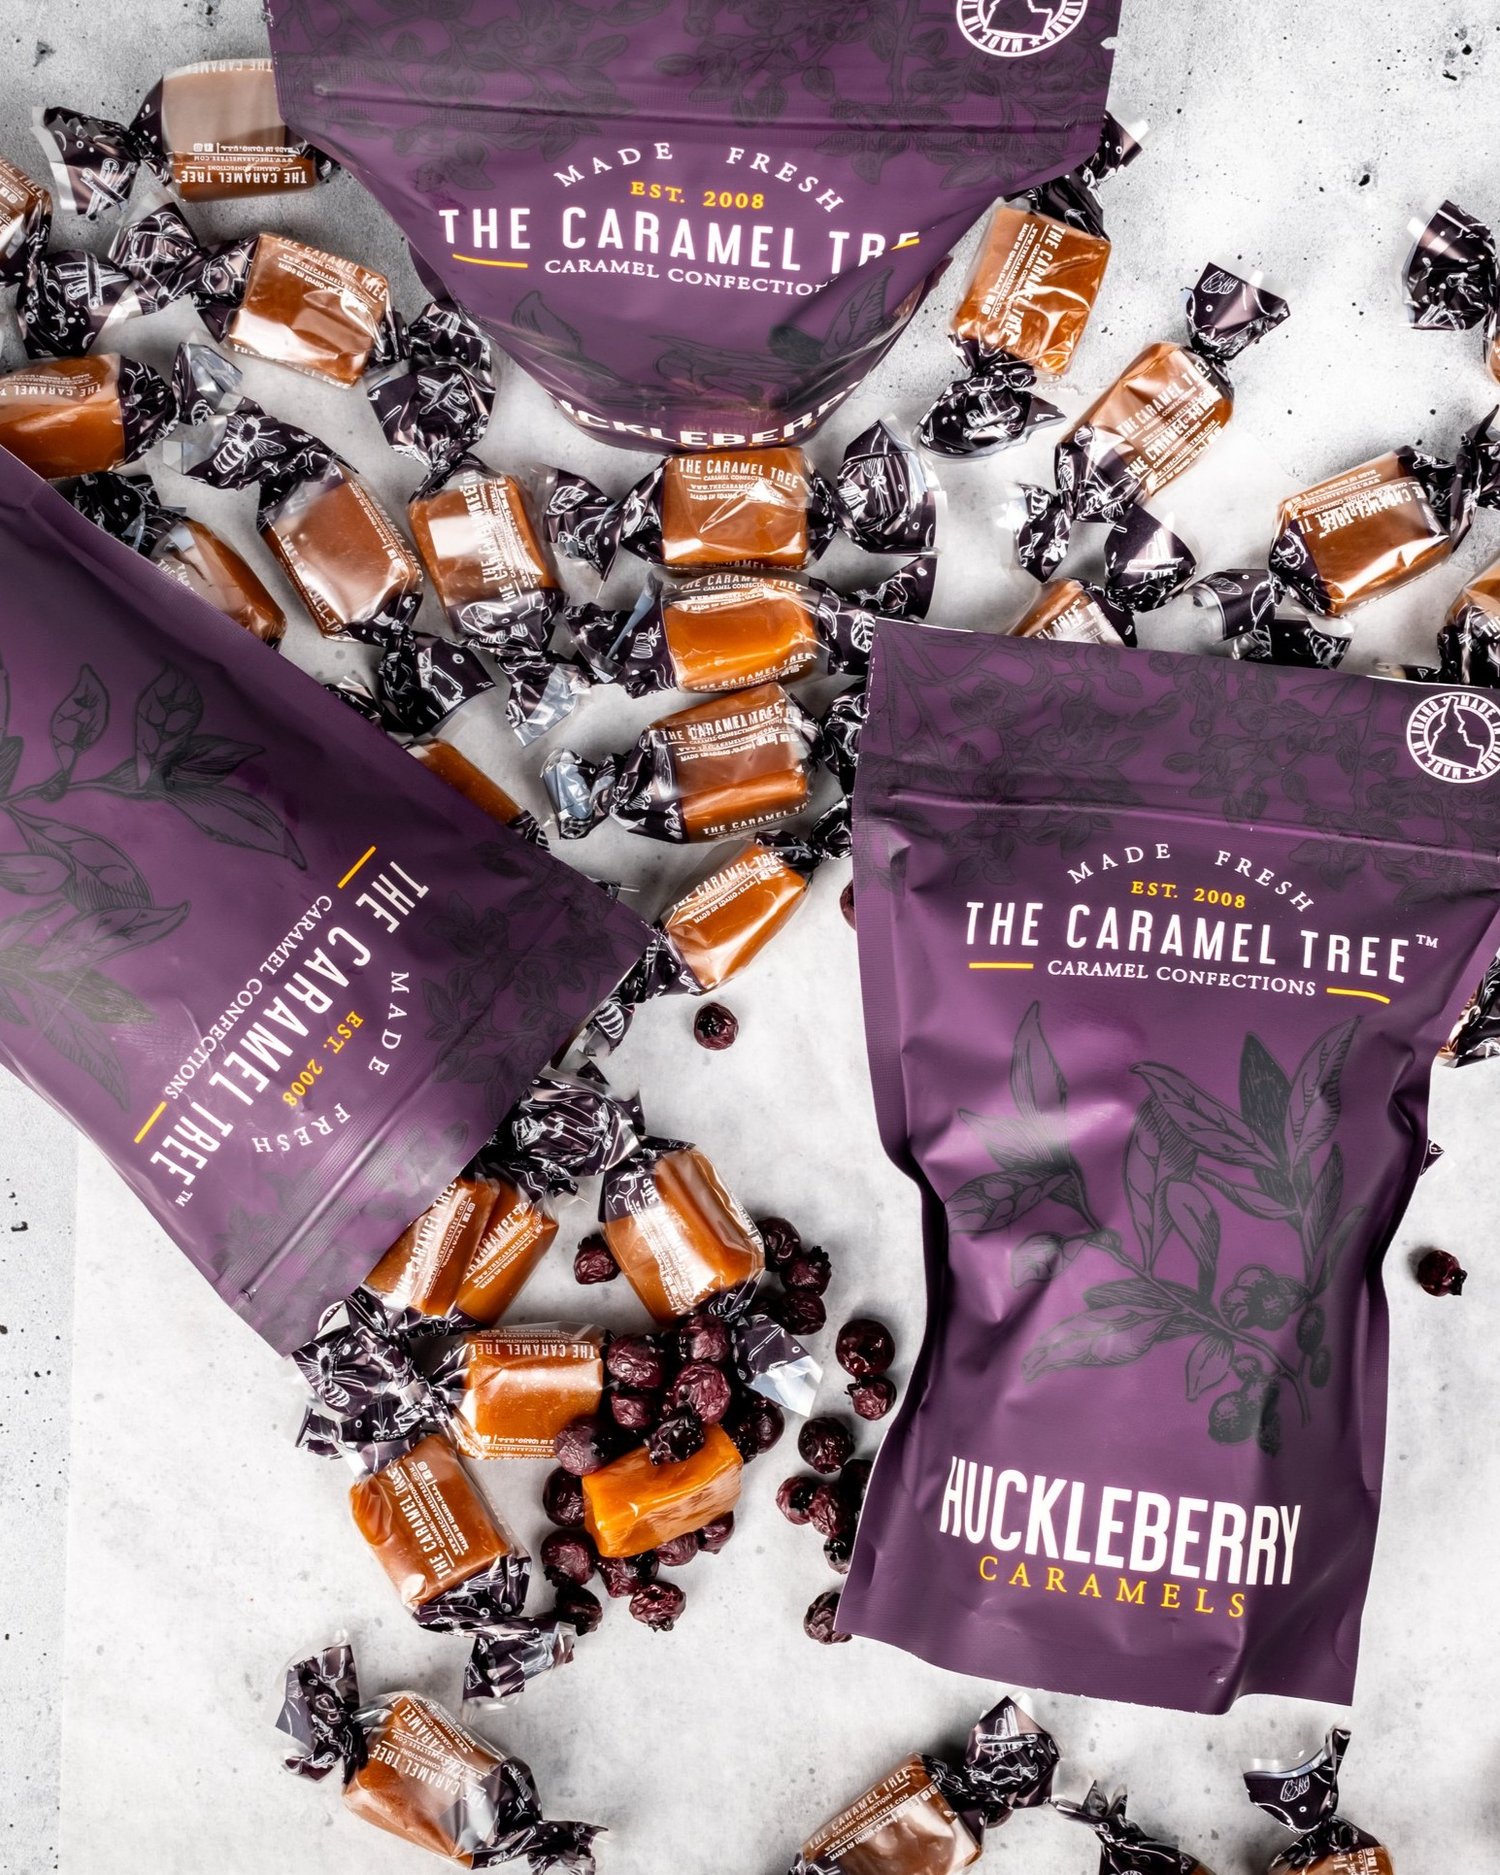 The Caramel Tree - Caramel Confections